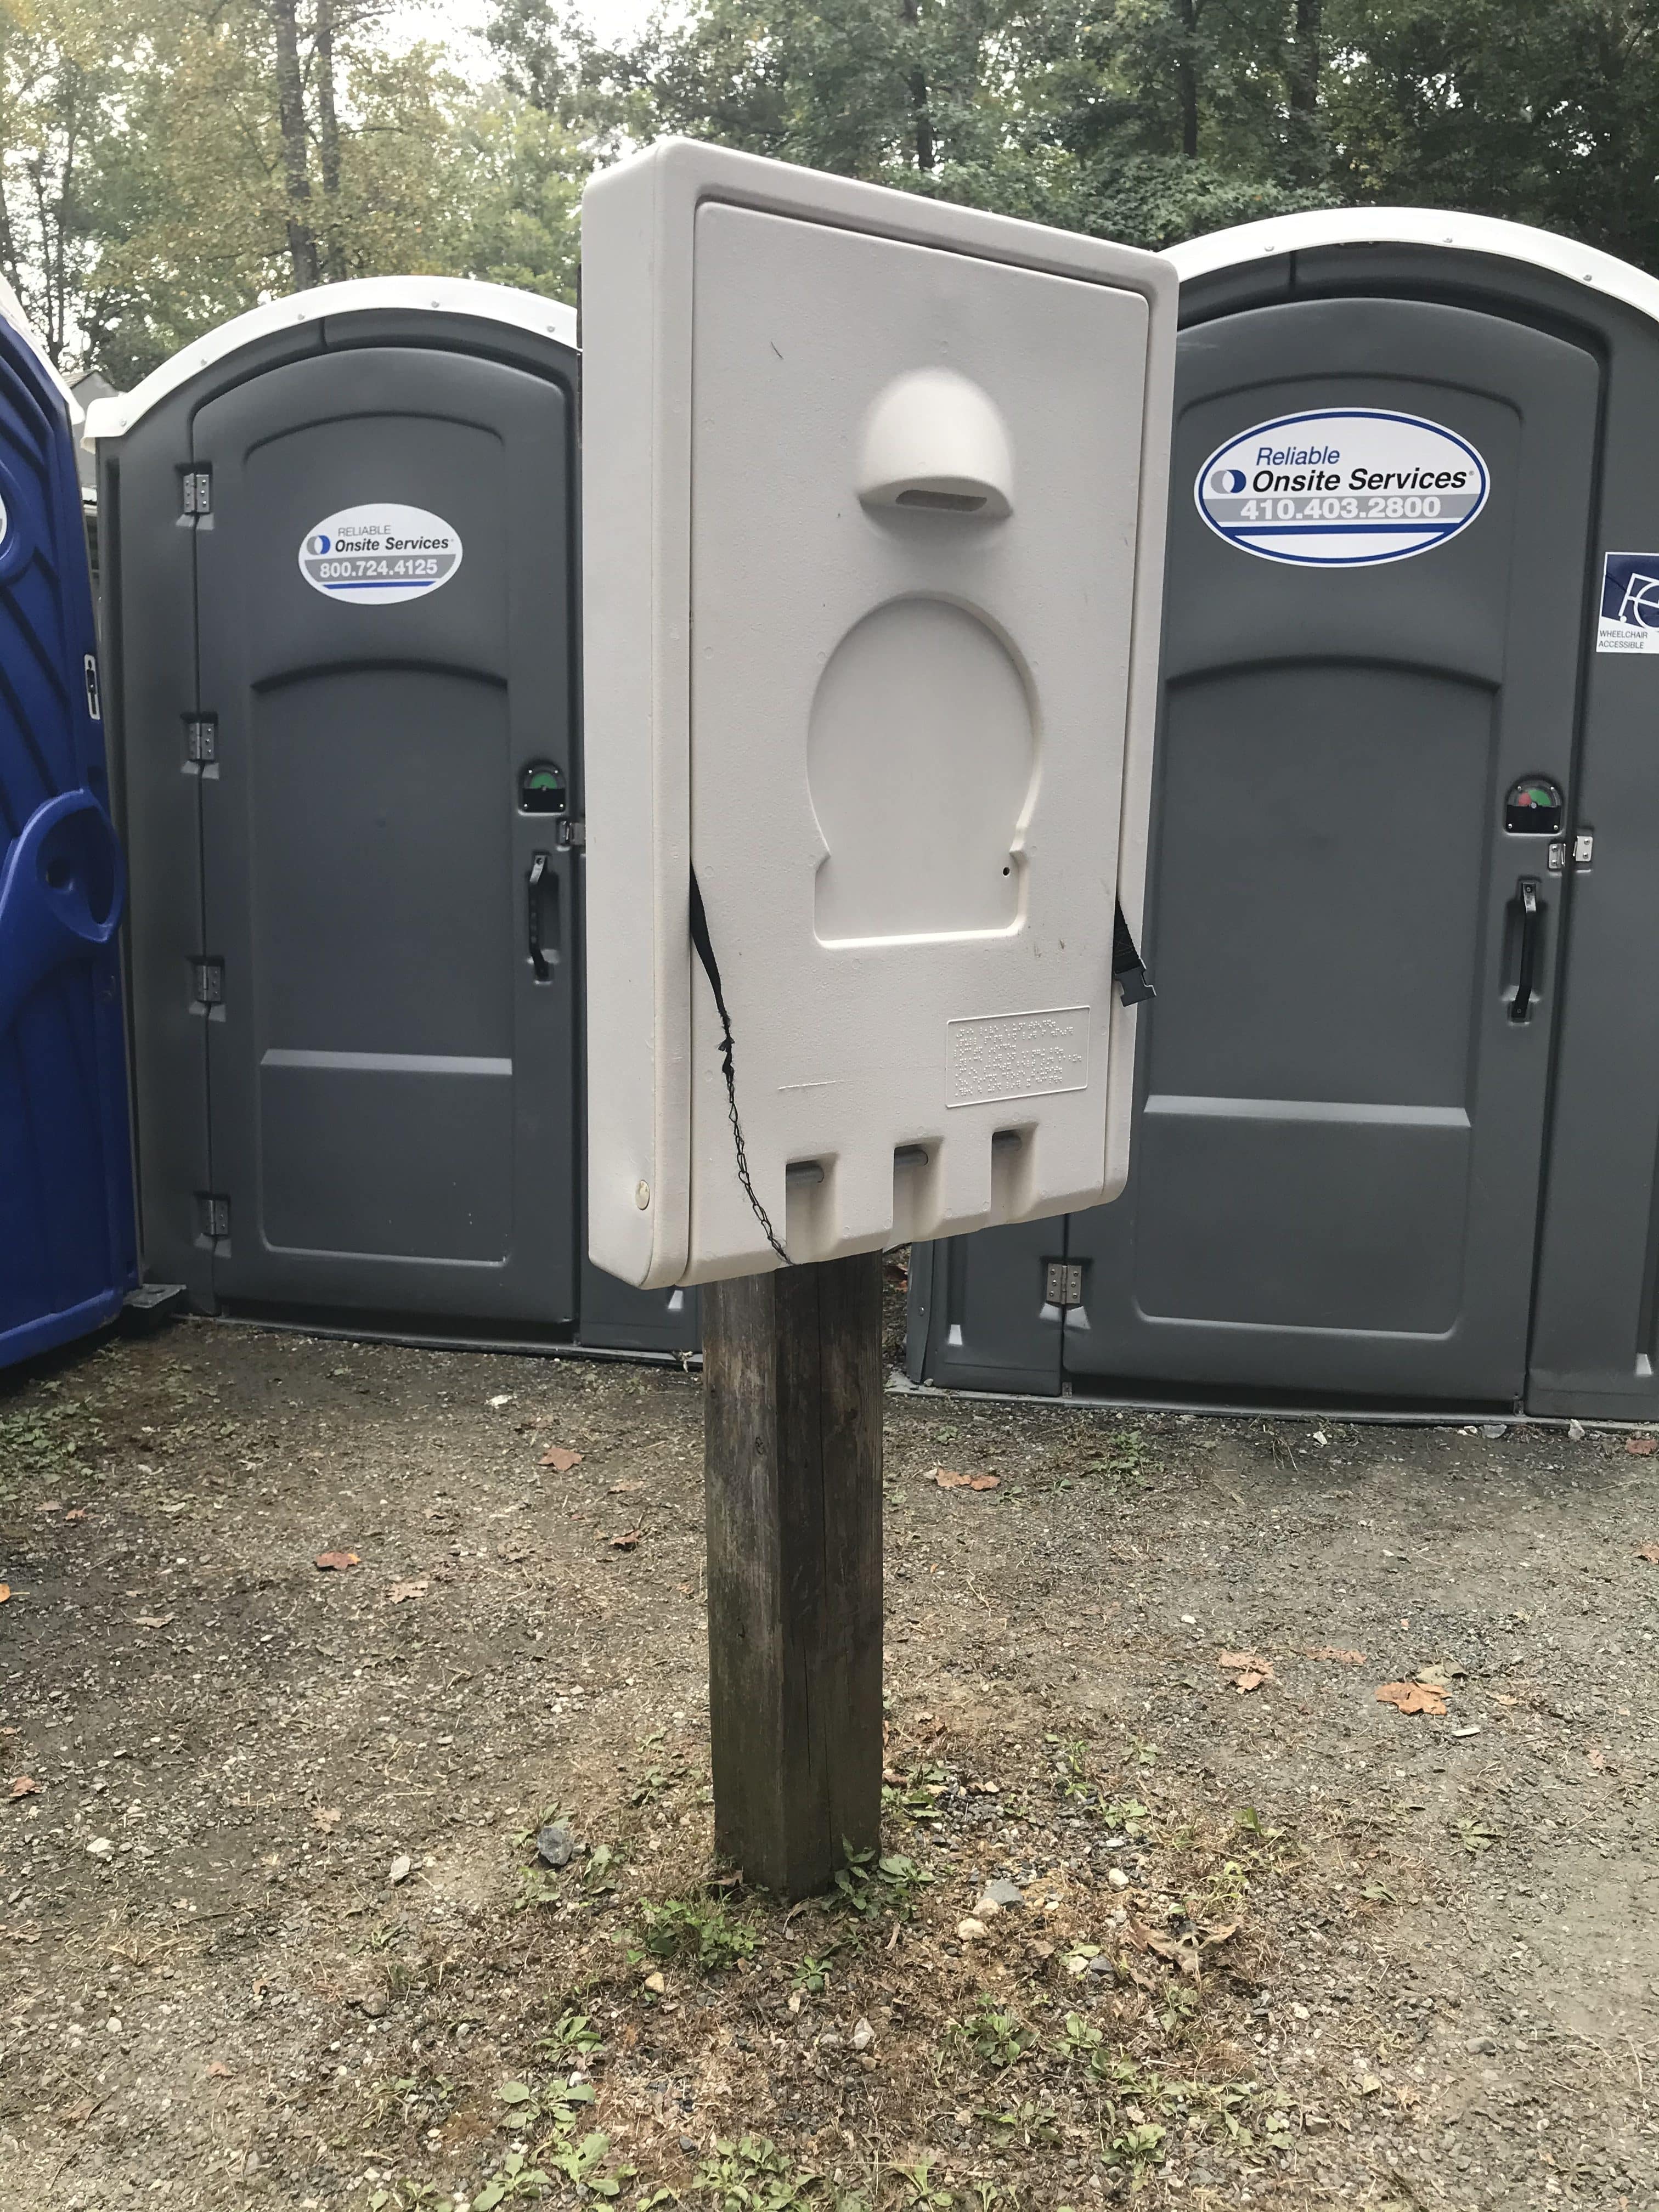 Baby Changing Station on a Wooden Post